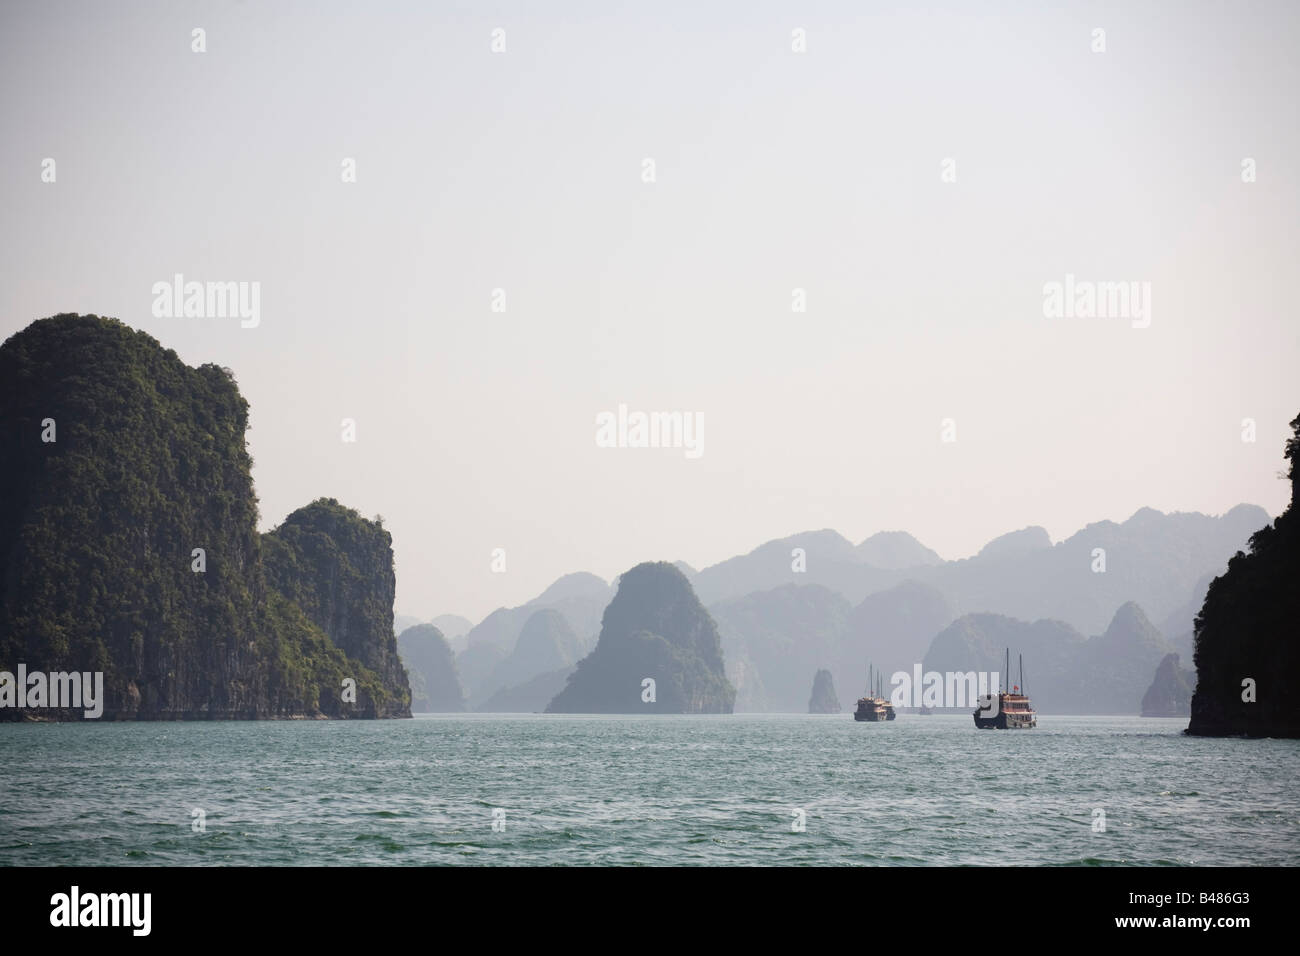 Junks and limestone karsts on the waters of Halong Bay Vietnam Stock Photo